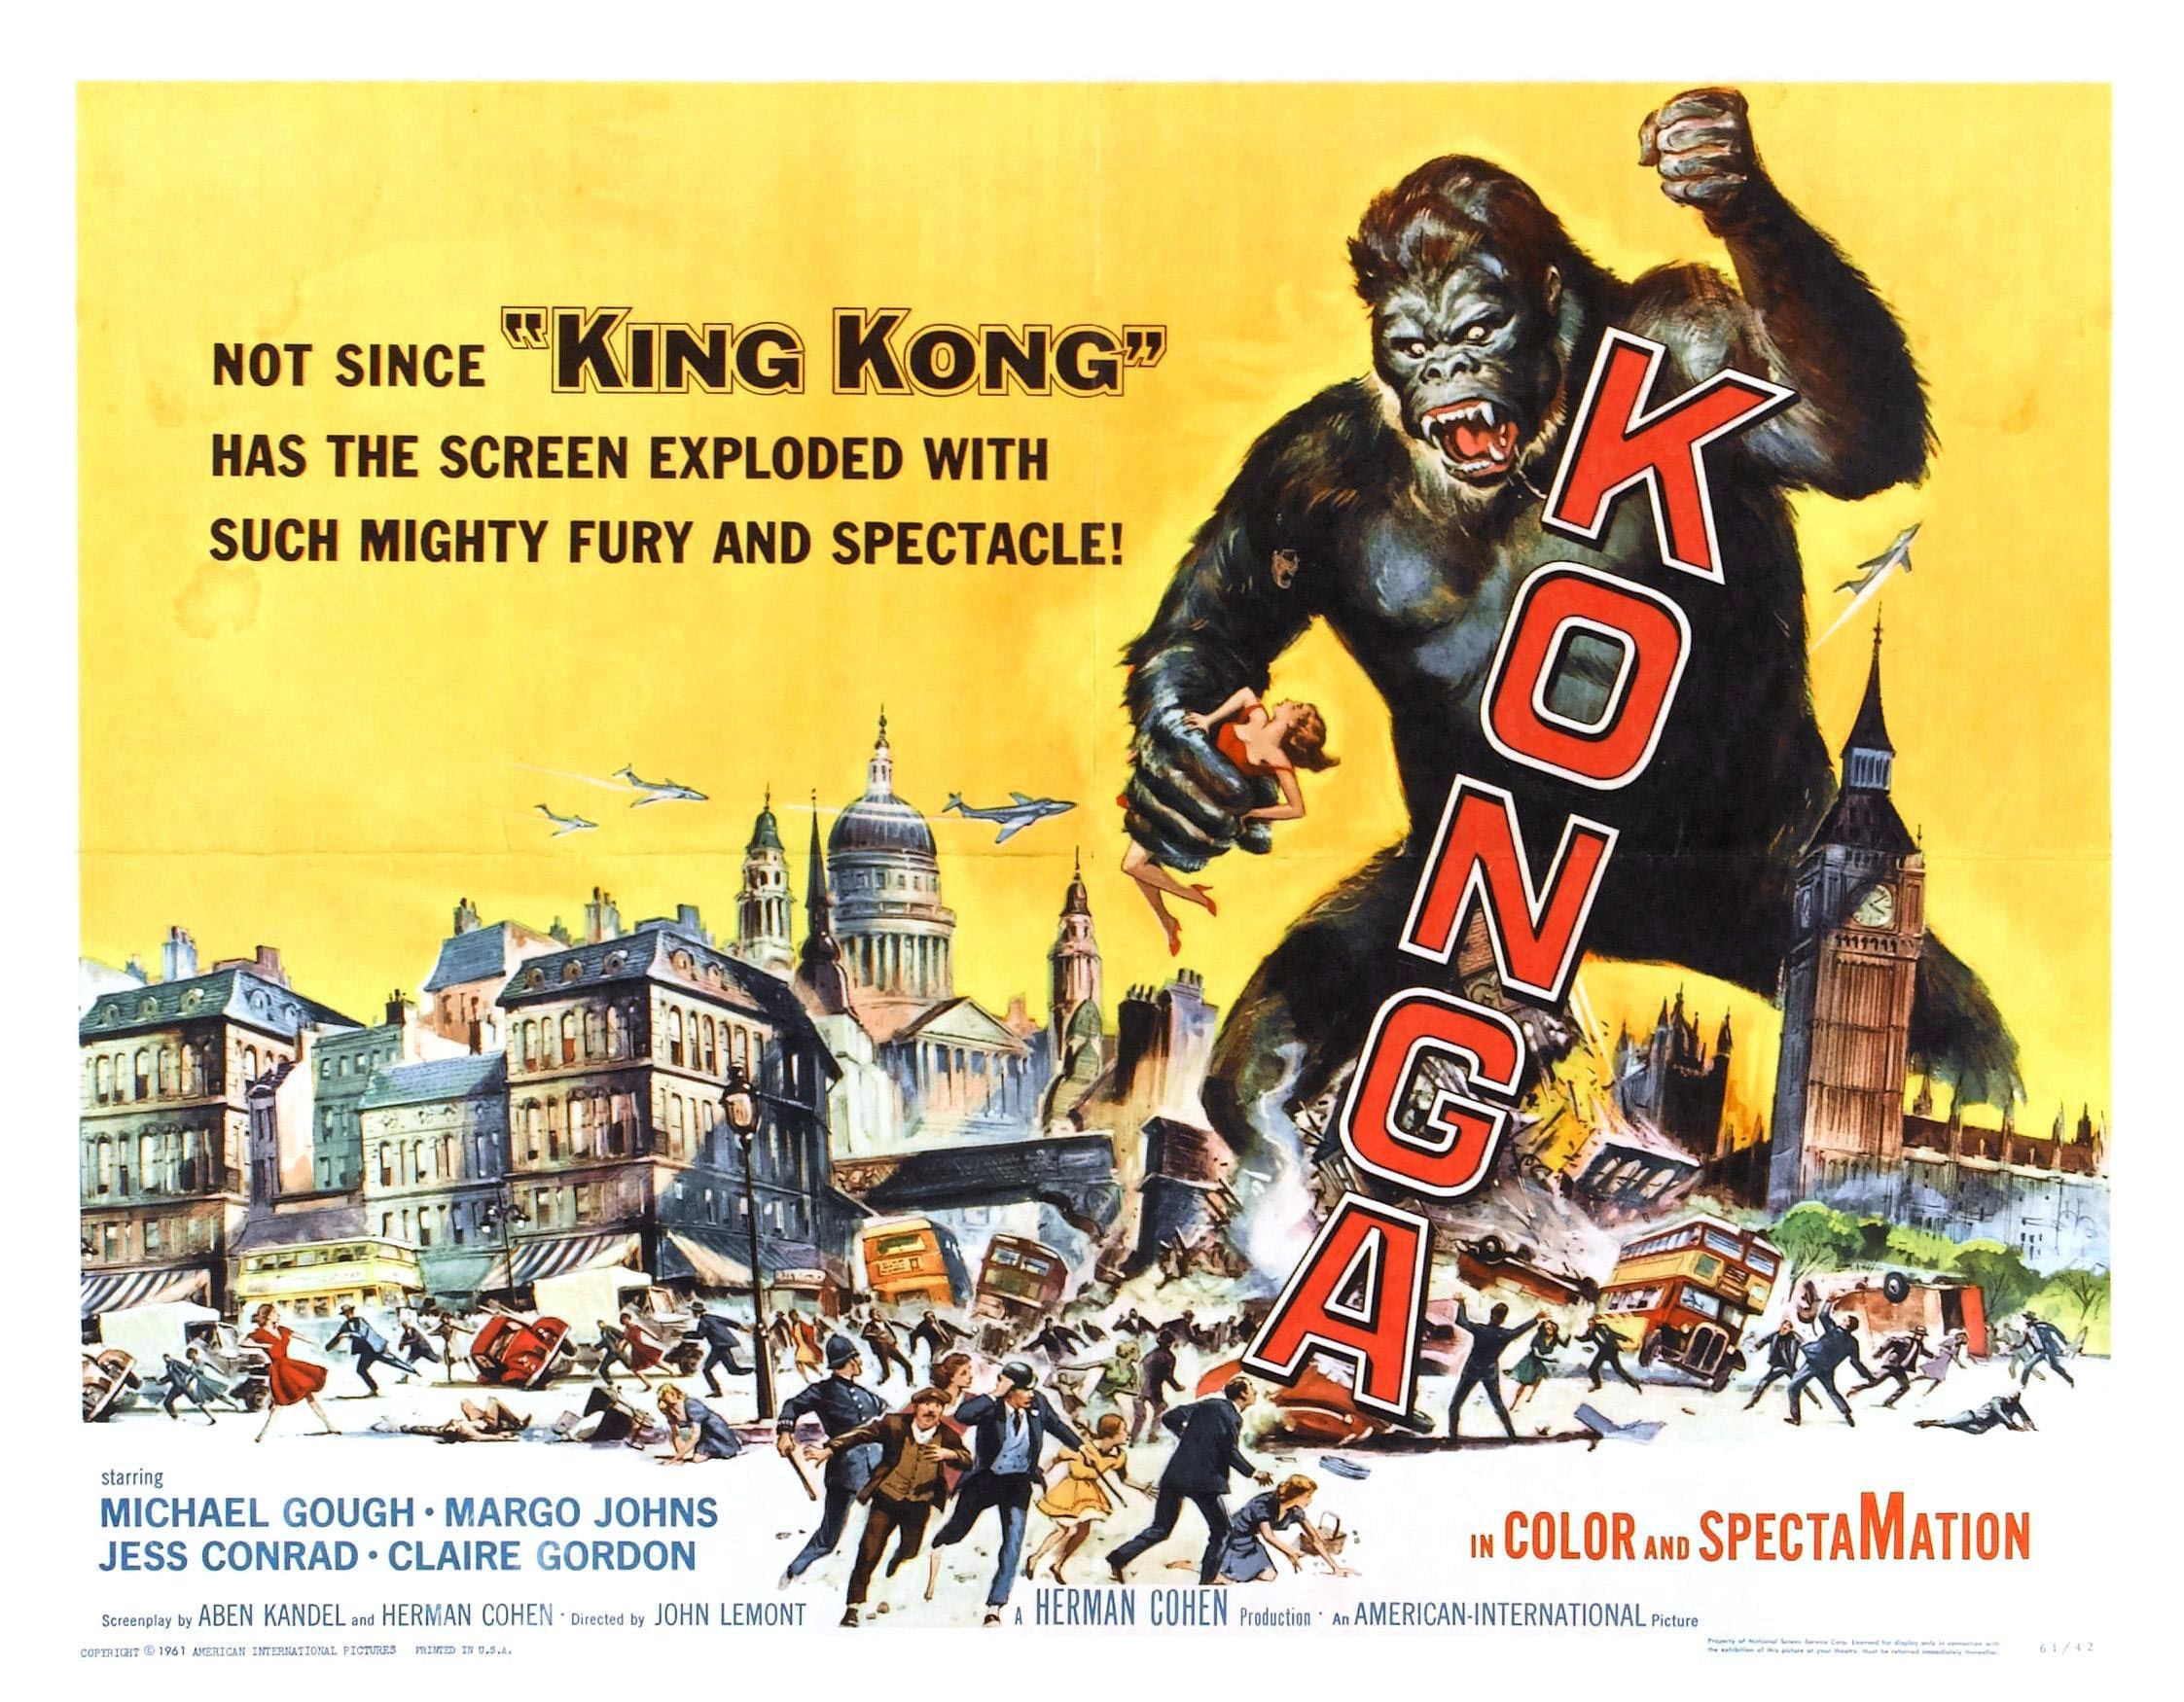 konga poster - Not Since "King Kong Has The Screen Exploded With Such Mighty Fury And Spectacle! Michael Gough. Margo Johns Jess Conrad.Claire Gordon Aben Kandel Herman Cohen John Lemont Color And Spectamation Herman Cohen American International